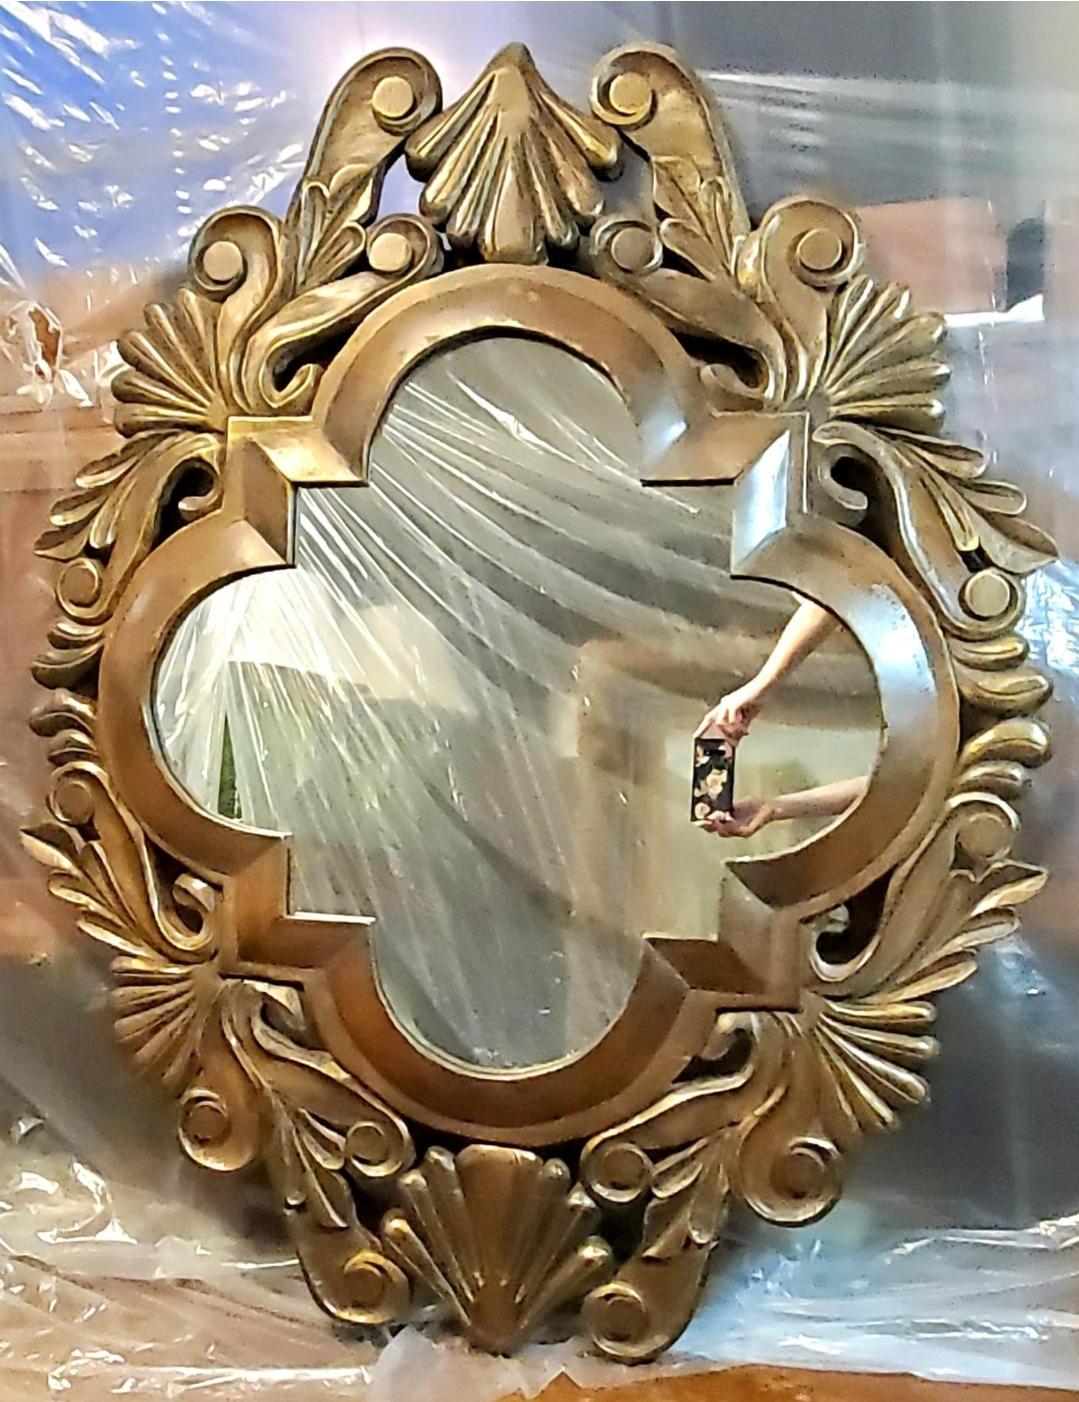 Post modern.
Striking.
Looks different from different angles.
Vintage 30-40 year old hand carved, solid mahogany mirror.
Silver dusted finish.
Shell carvings.
Hollywood regency.
Art deco. less

